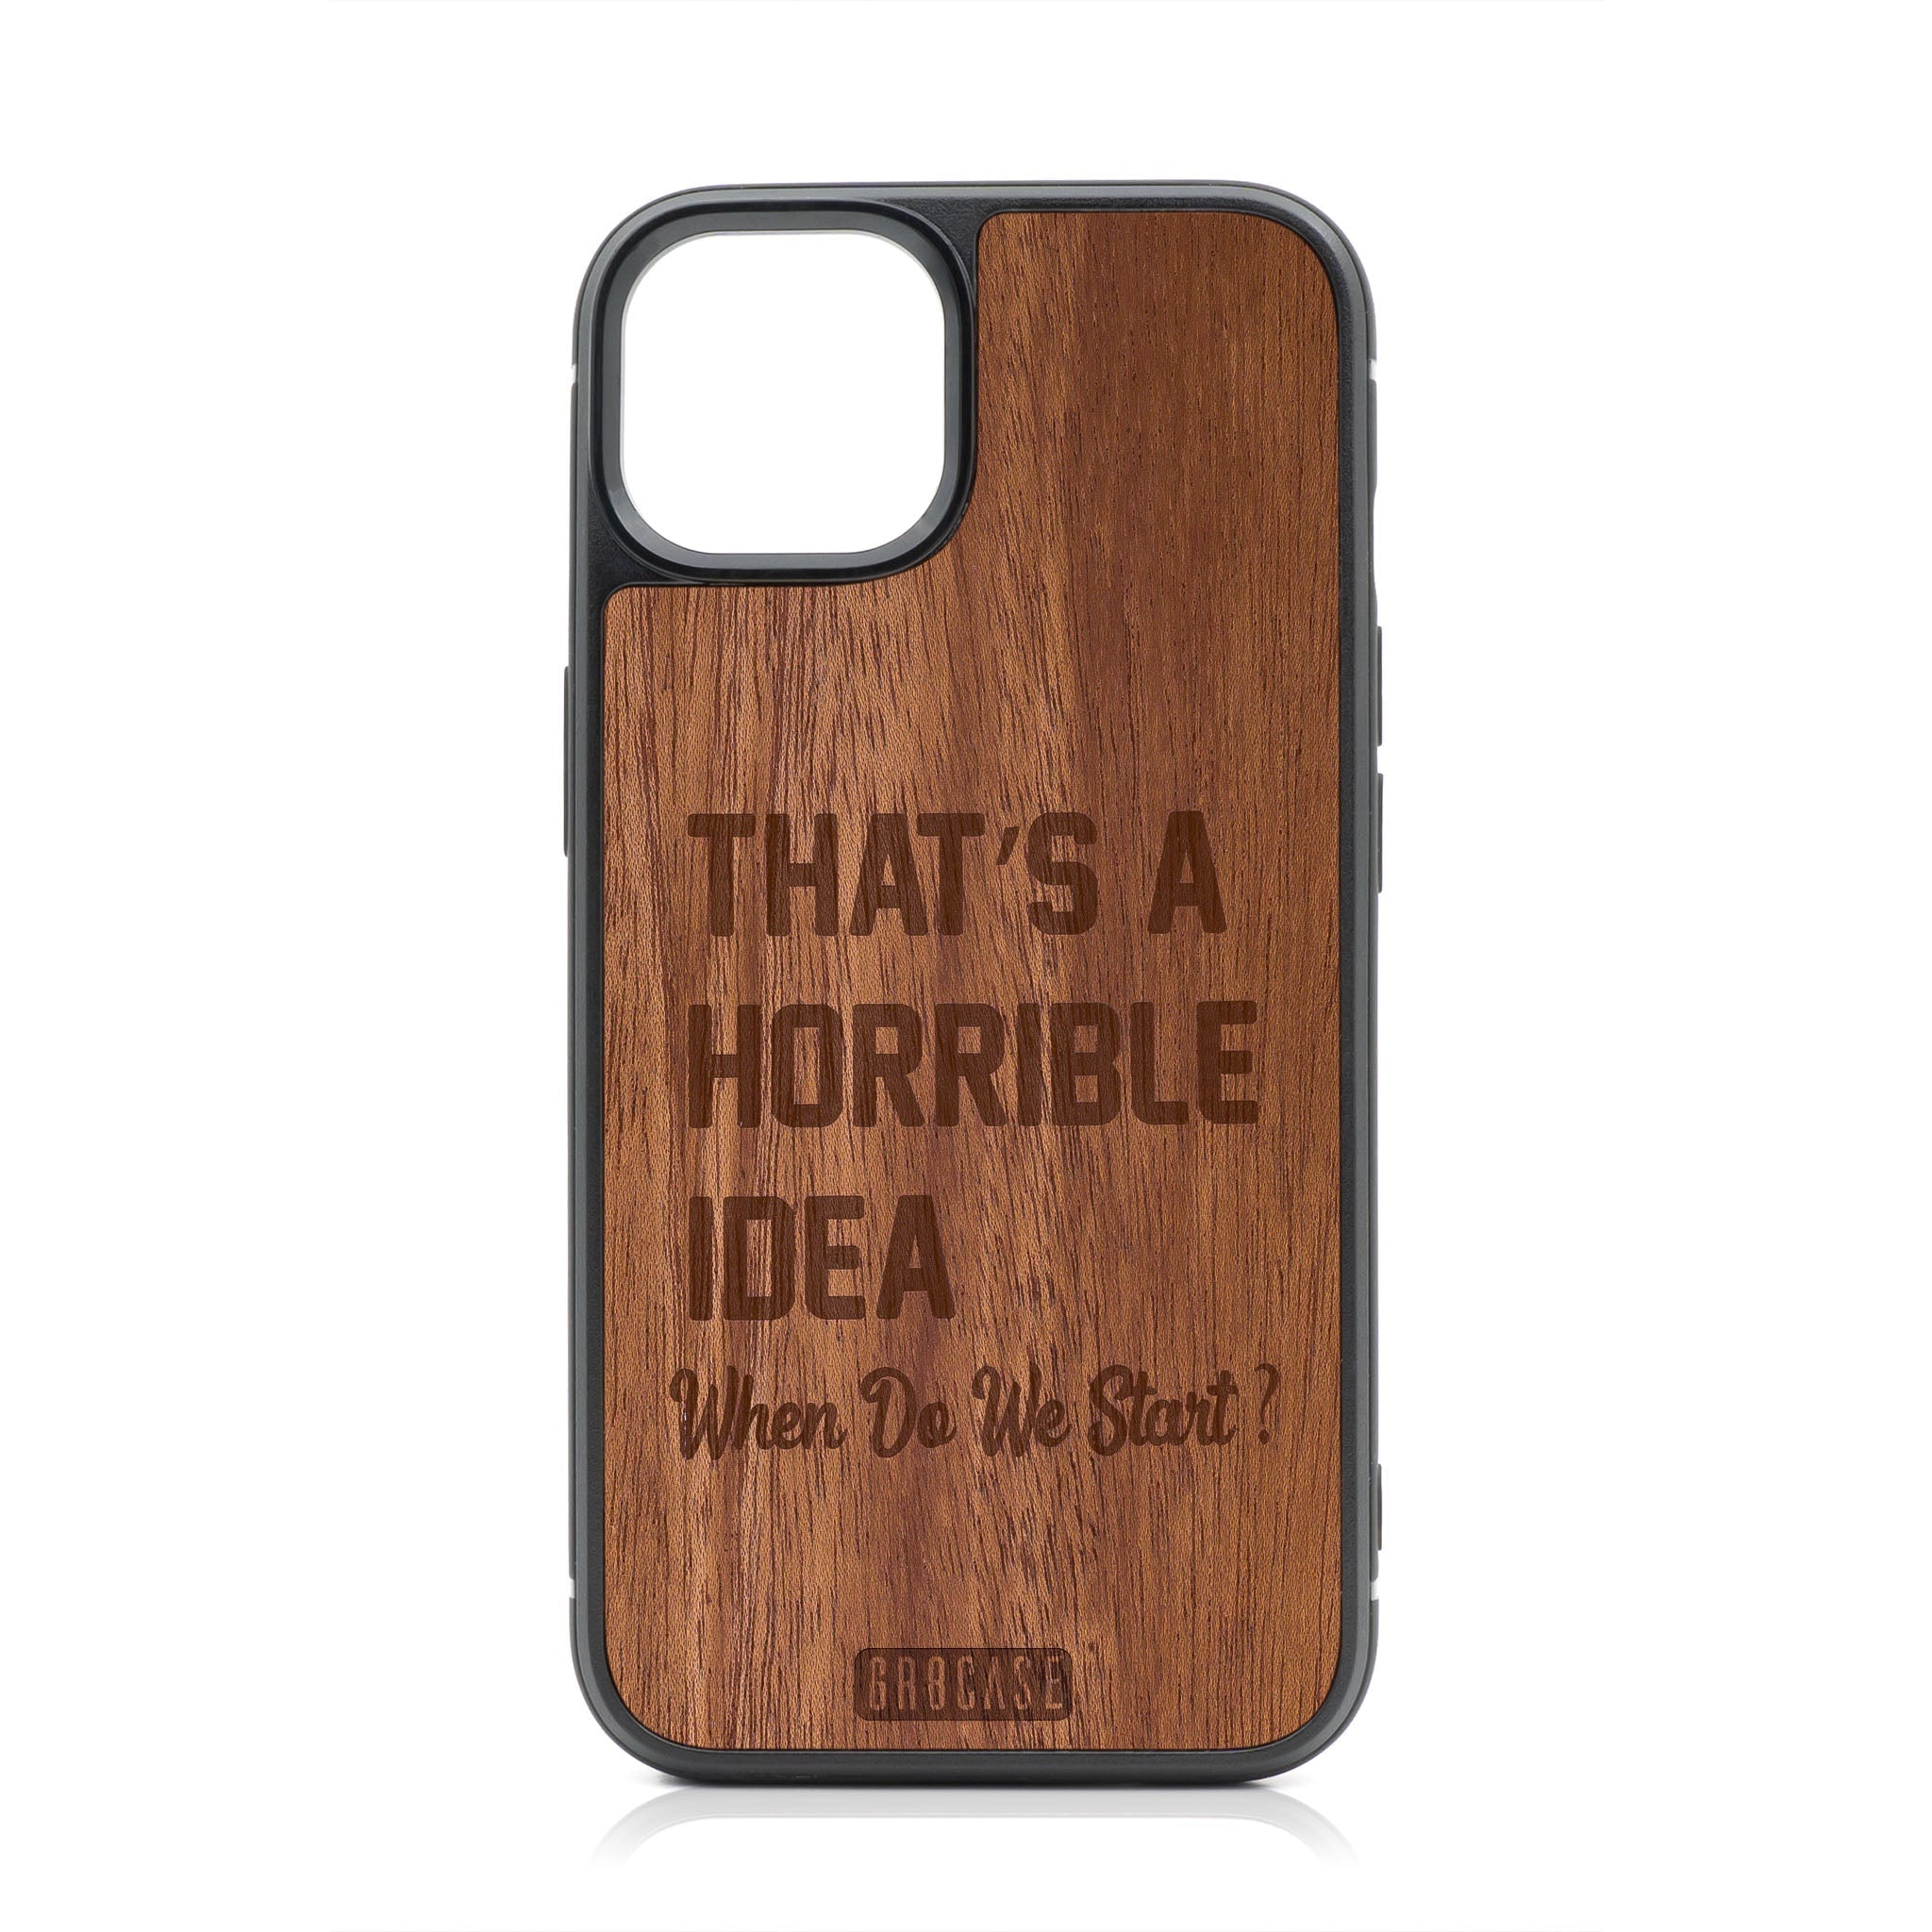 That's A Horrible Idea When Do We Start? Design Wood Case For iPhone 1